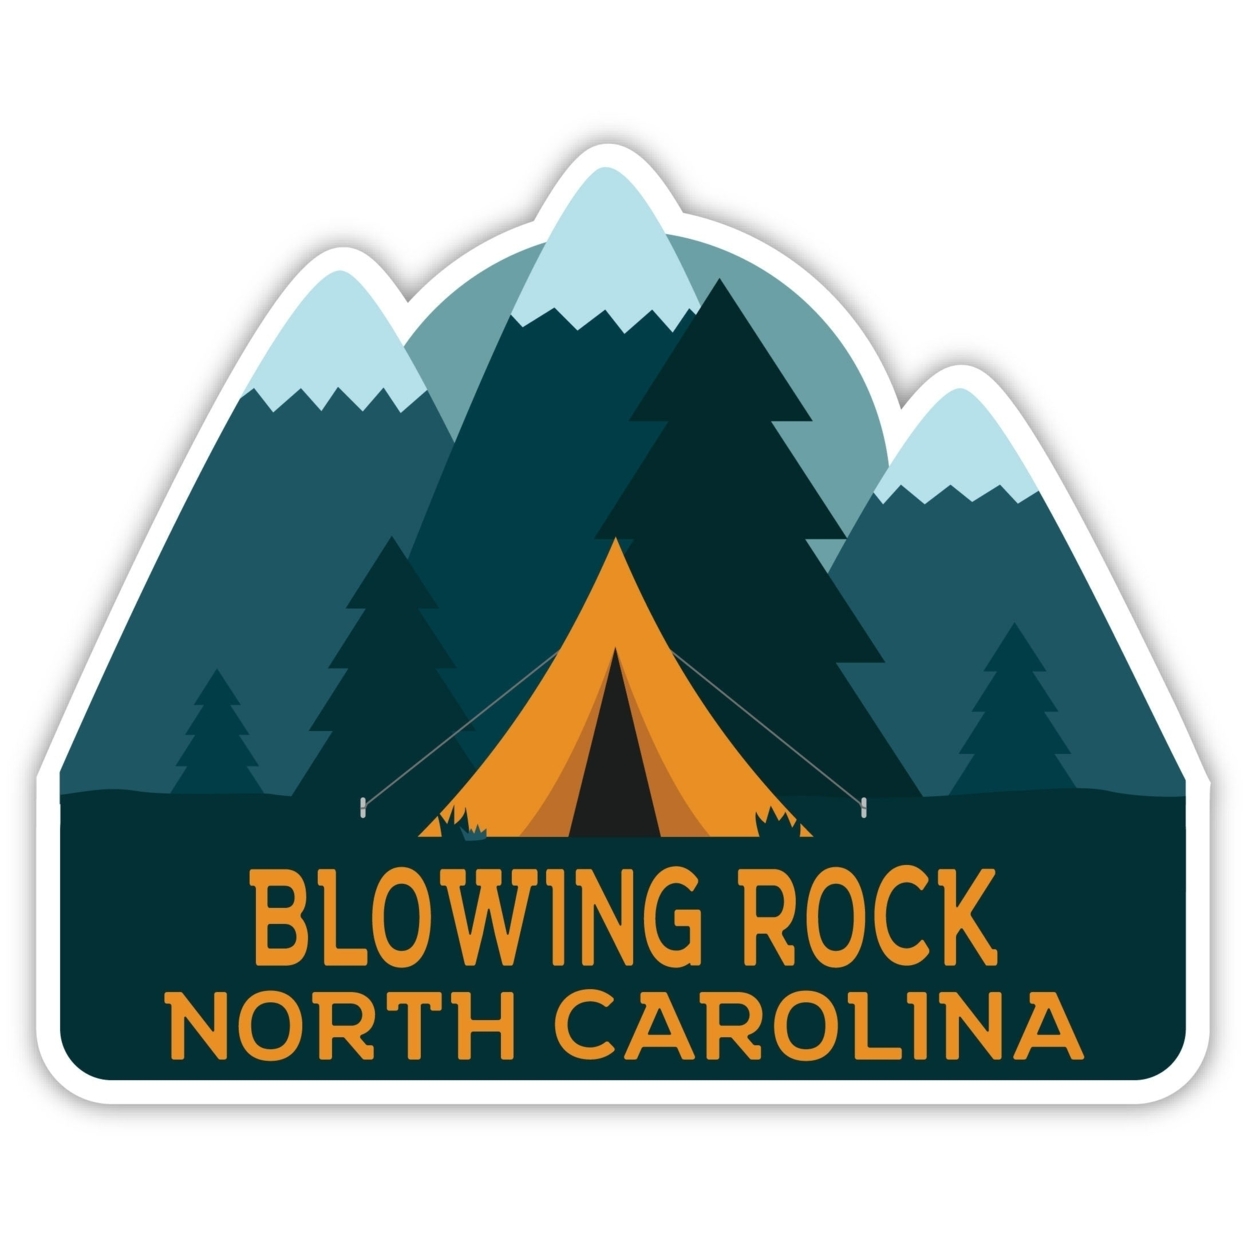 Blowing Rock North Carolina Souvenir Decorative Stickers (Choose Theme And Size) - 4-Pack, 12-Inch, Camp Life